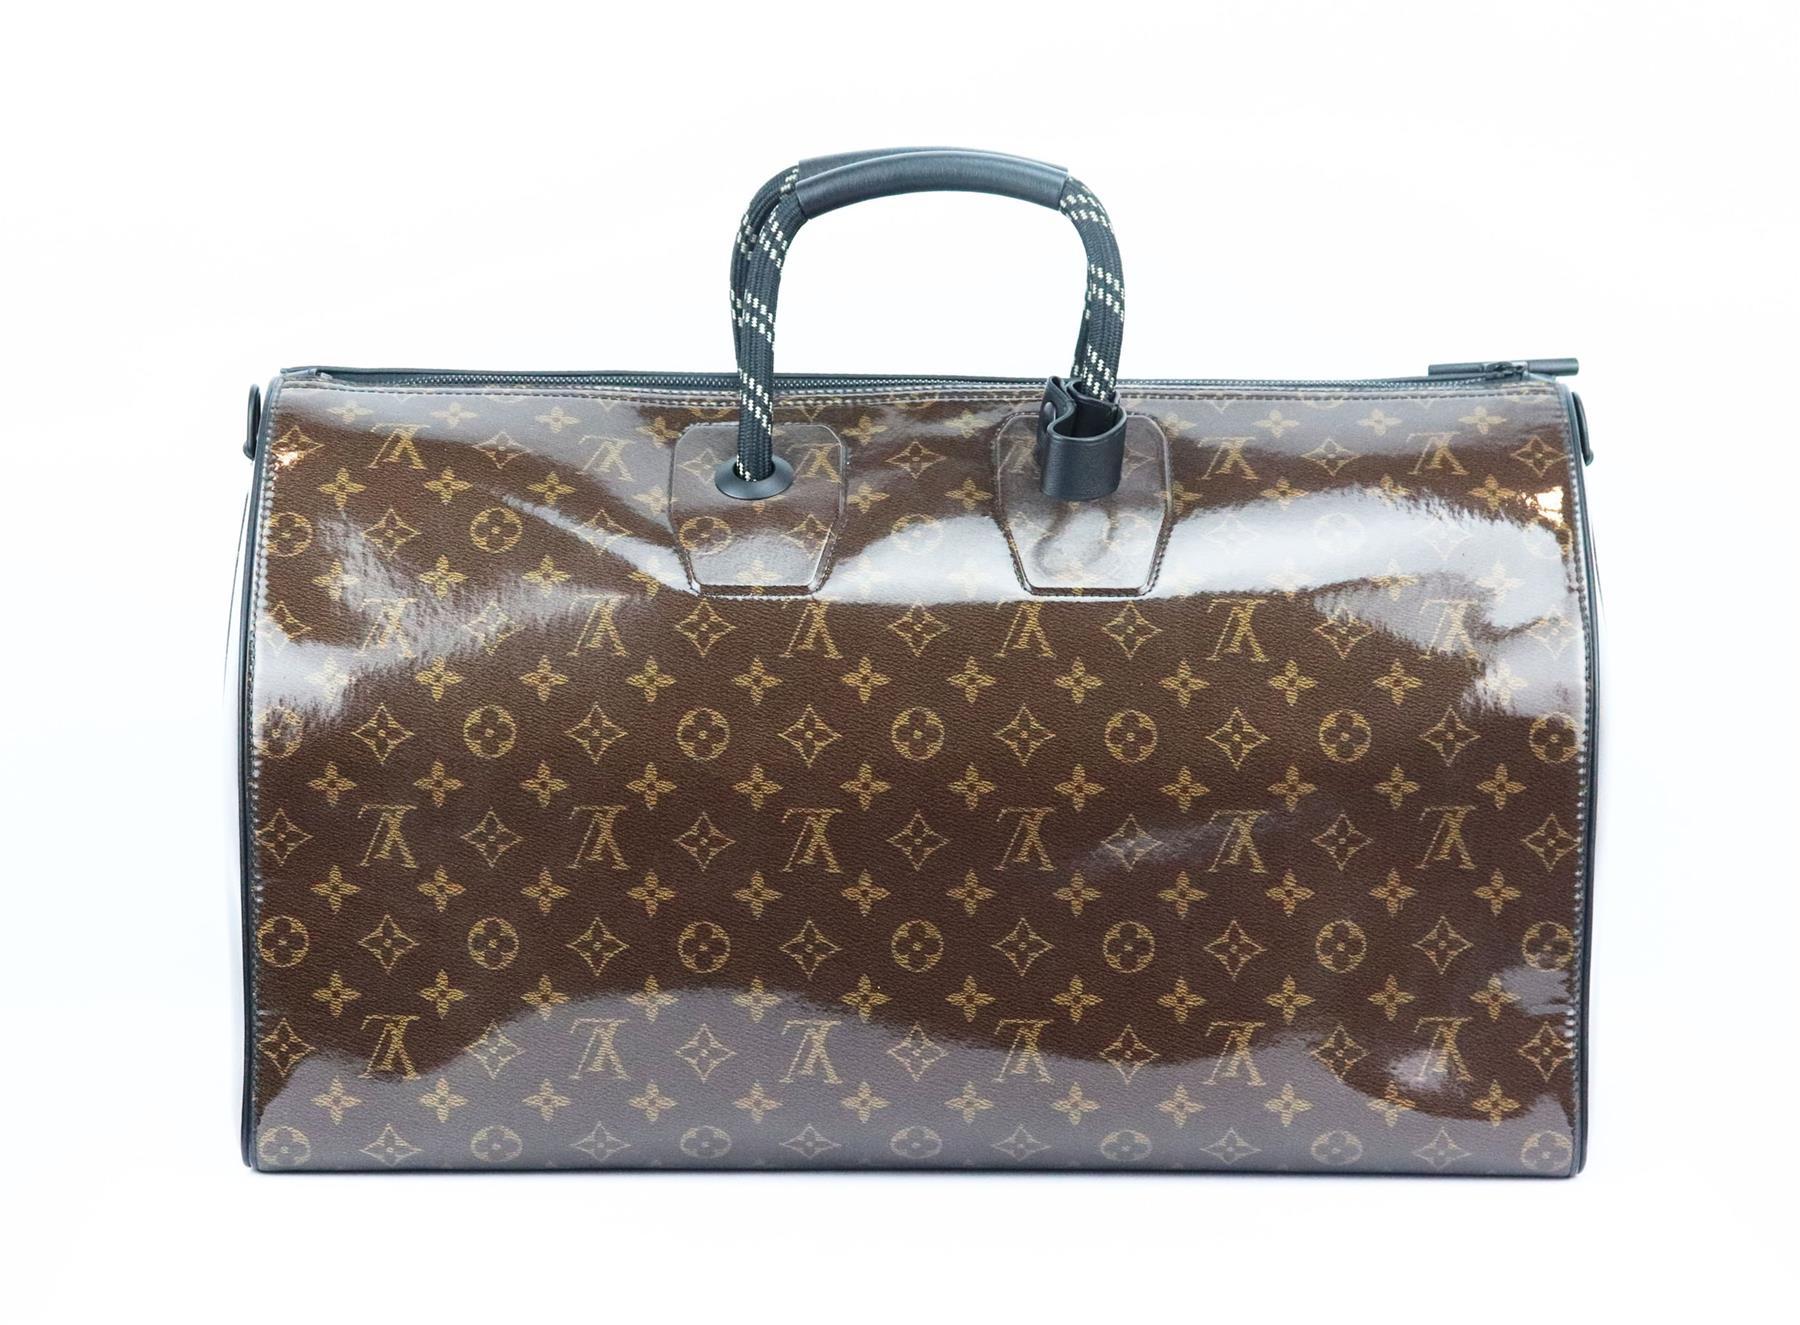 This 2018 ‘Keepall Bandoulière 50’ travel bag by Louis Vuitton is inspired by a classic duffle bag re-imagined, crafted from tonal-brown Monogram glaze canvas and lined in black canvas with black leather and rope handles and shoulder strap, it has